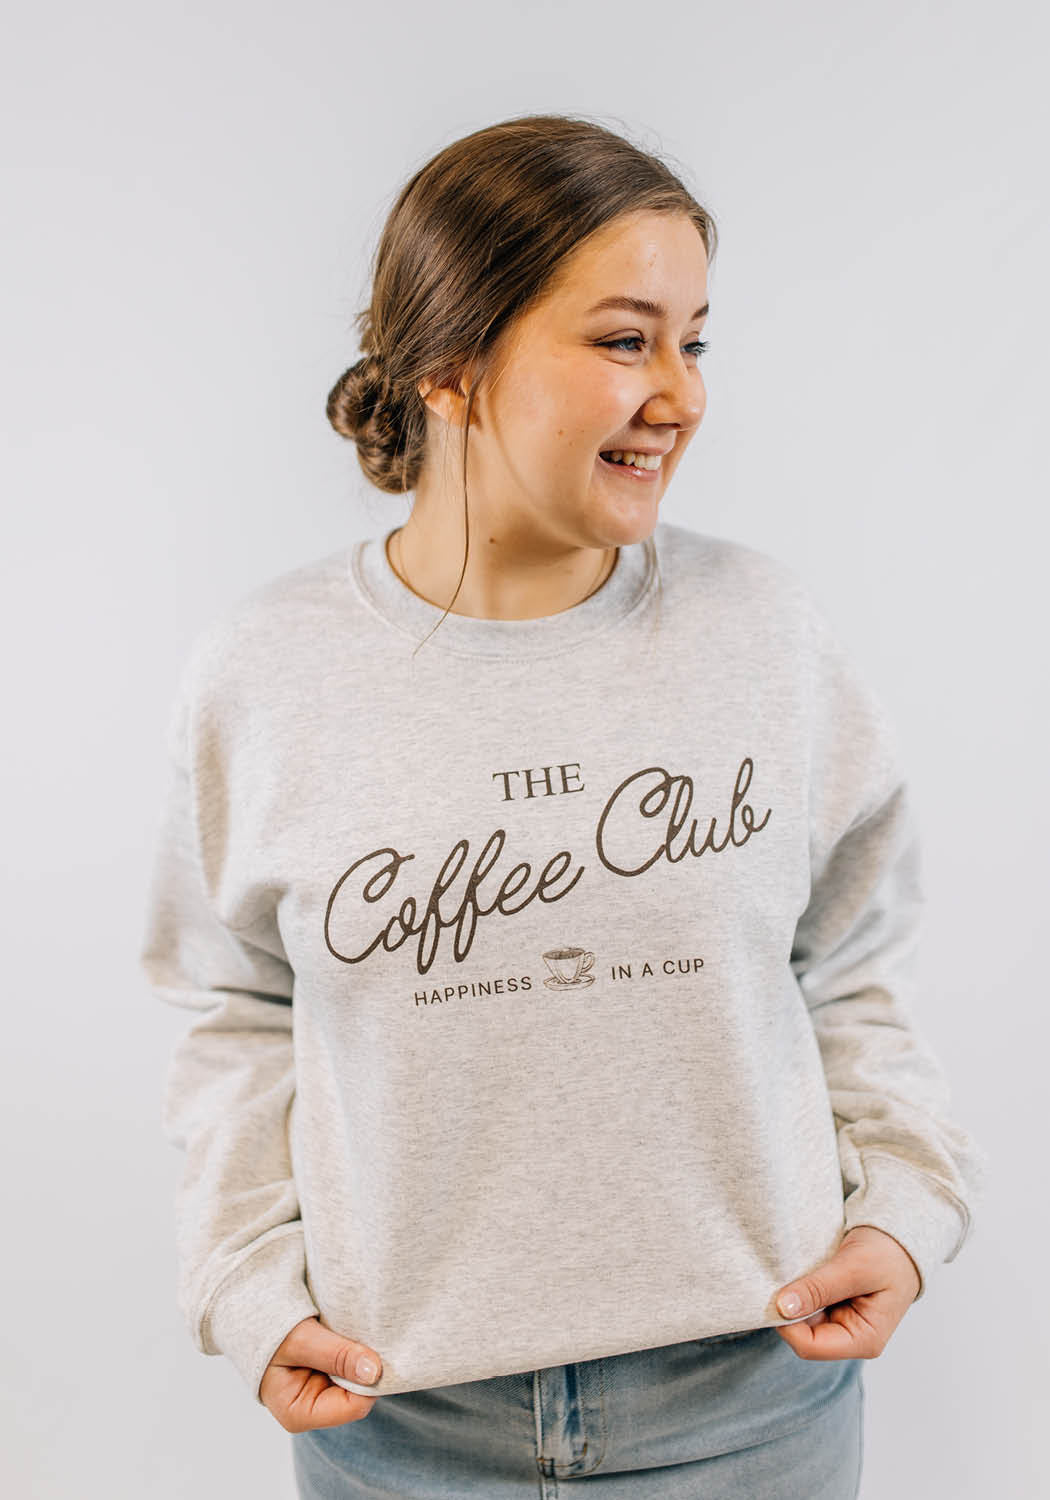 The Coffee Club Pullover